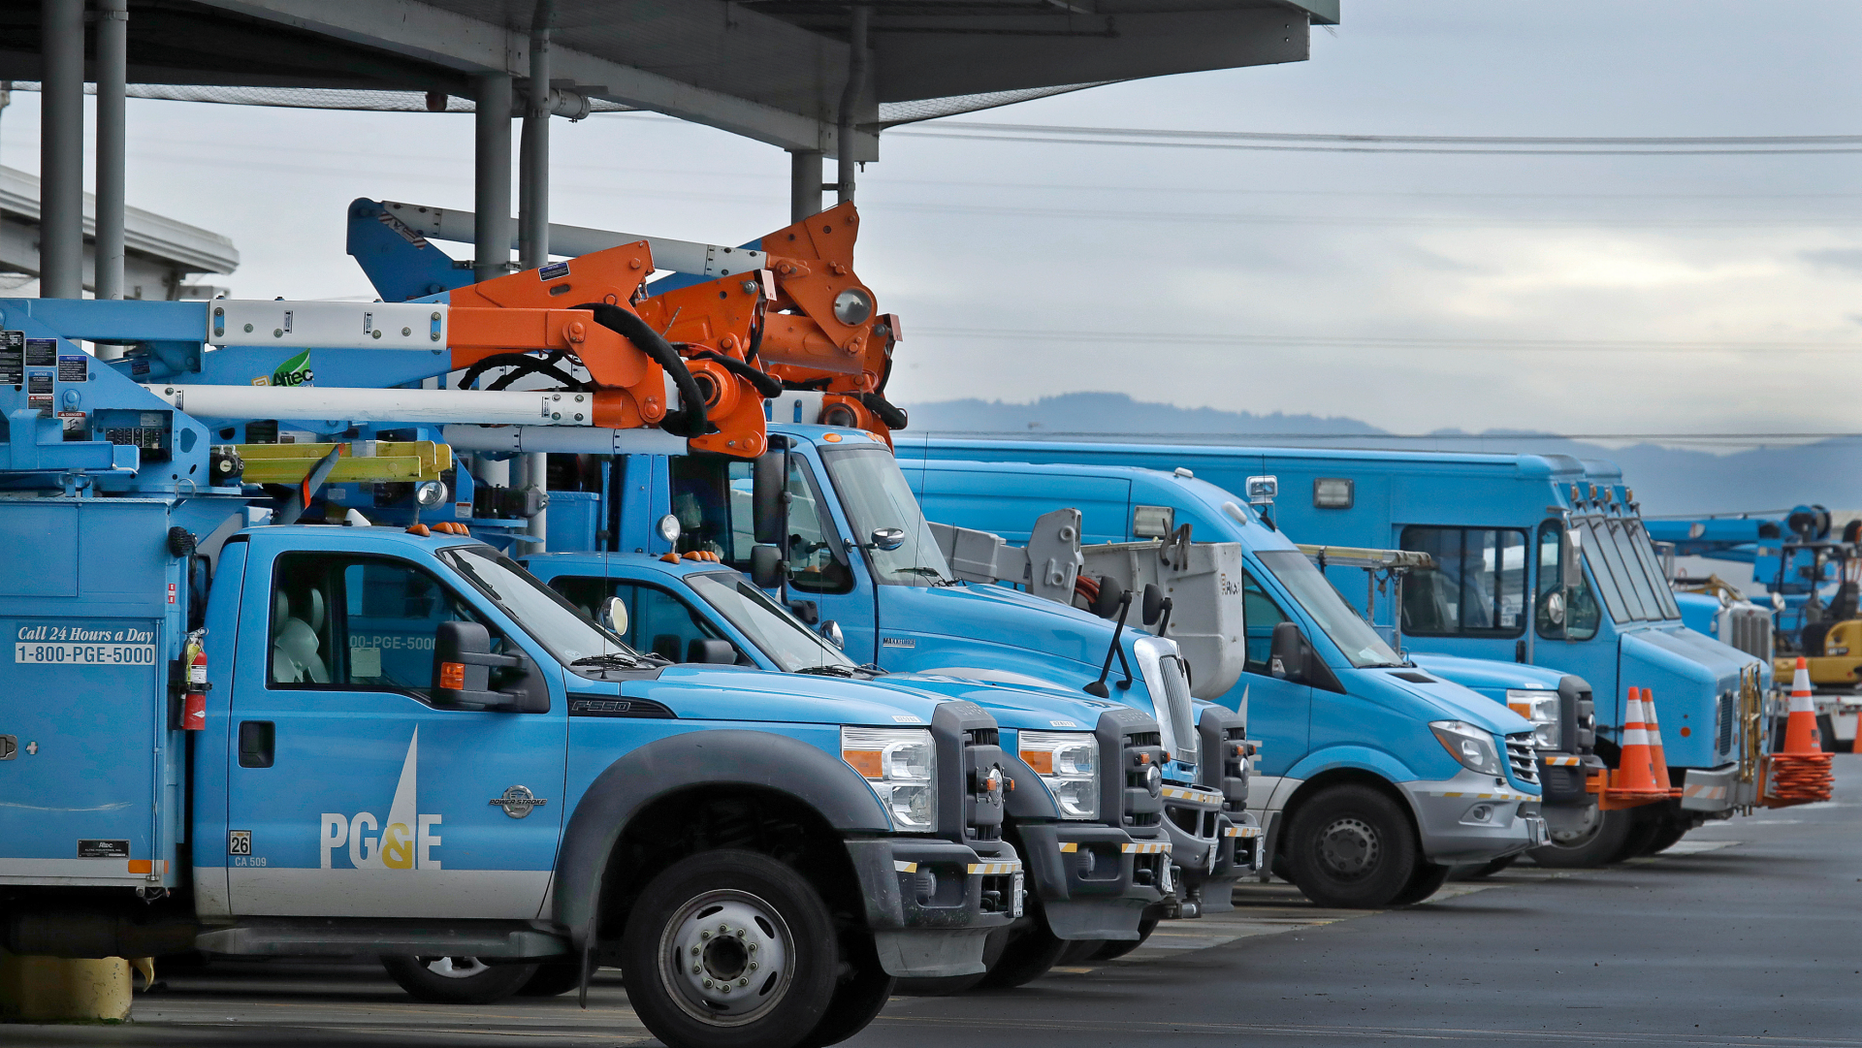 DOSSIER - In this January 14, 2019, photo of the record, Pacific Gas & amp; Electric vehicles are parked at the PG & E Oakland Service Center in Oakland, California. The first fire hazard warning presented this year in Northern California puts Pacific Gas & amp; Electric on alert. The electricity company has announced that as of Saturday, June 8, 2019, thousands of customers in areas north of San Francisco and the foothills of the Sierra could shut down the power to reduce the risks of electricity. ;fire. (AP Photo / Ben Margot, File)